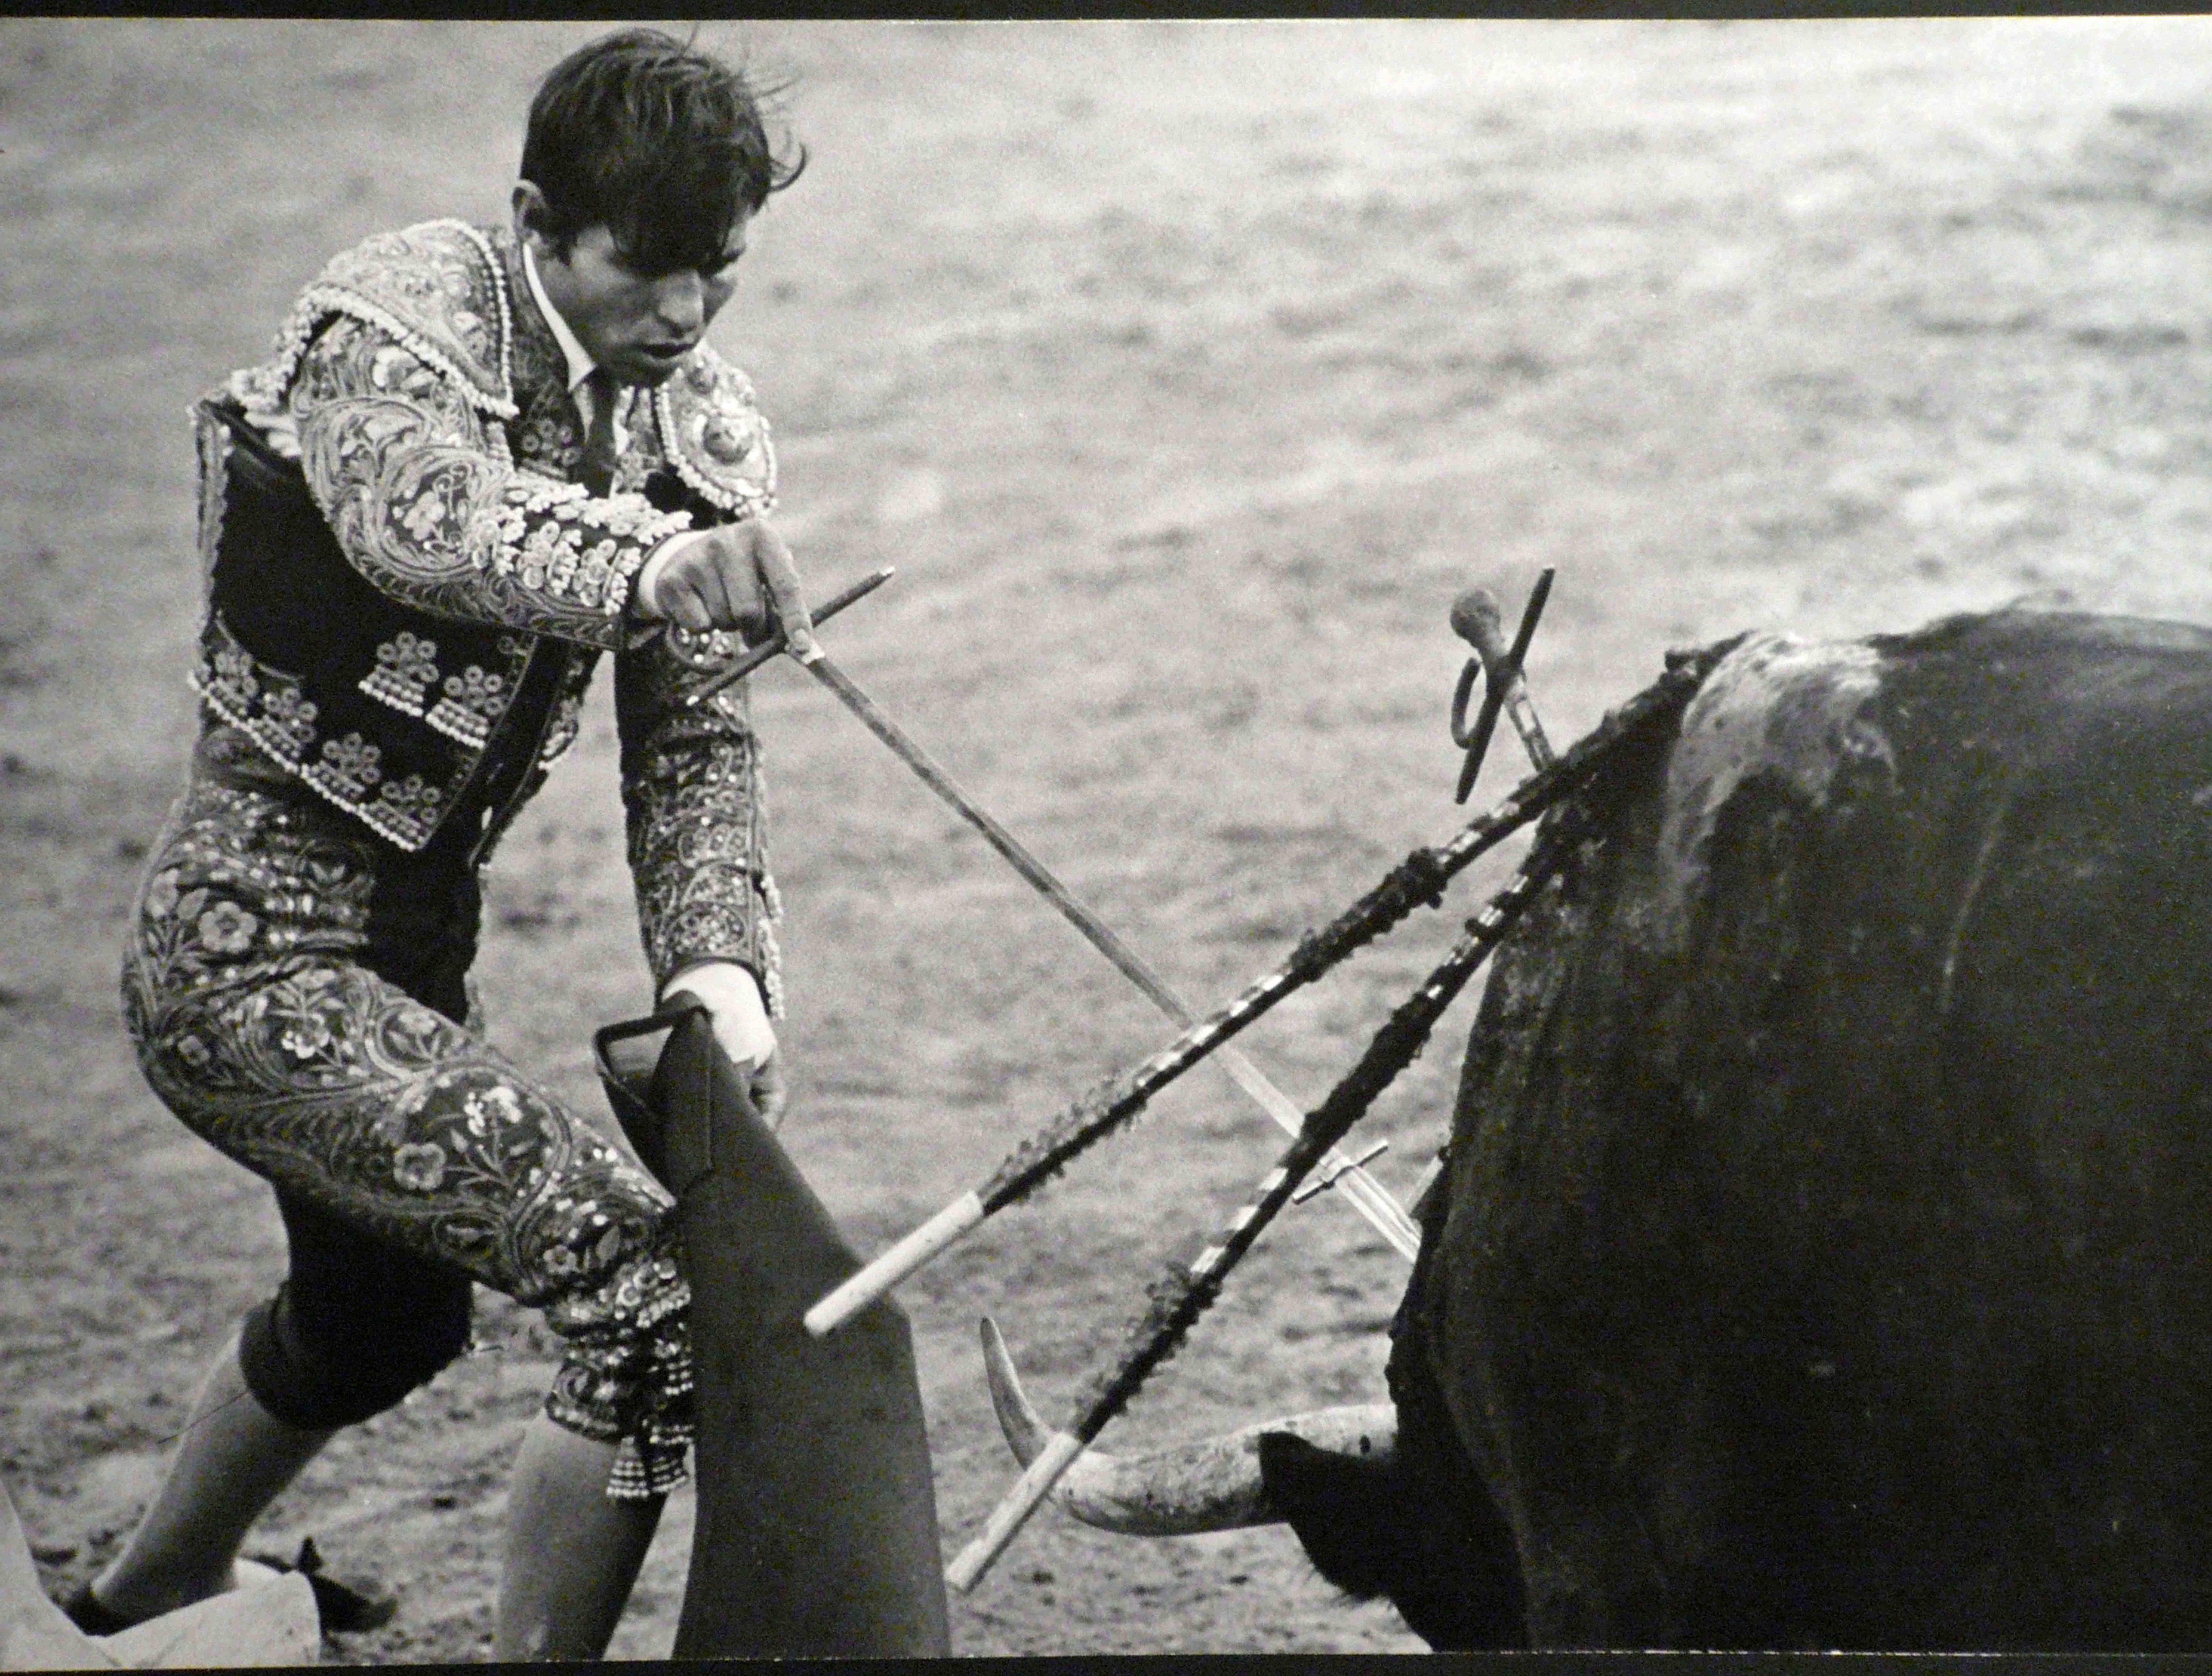 Unknown Portrait Photograph - EL CORDOBES - Three photos of the great bullfighter